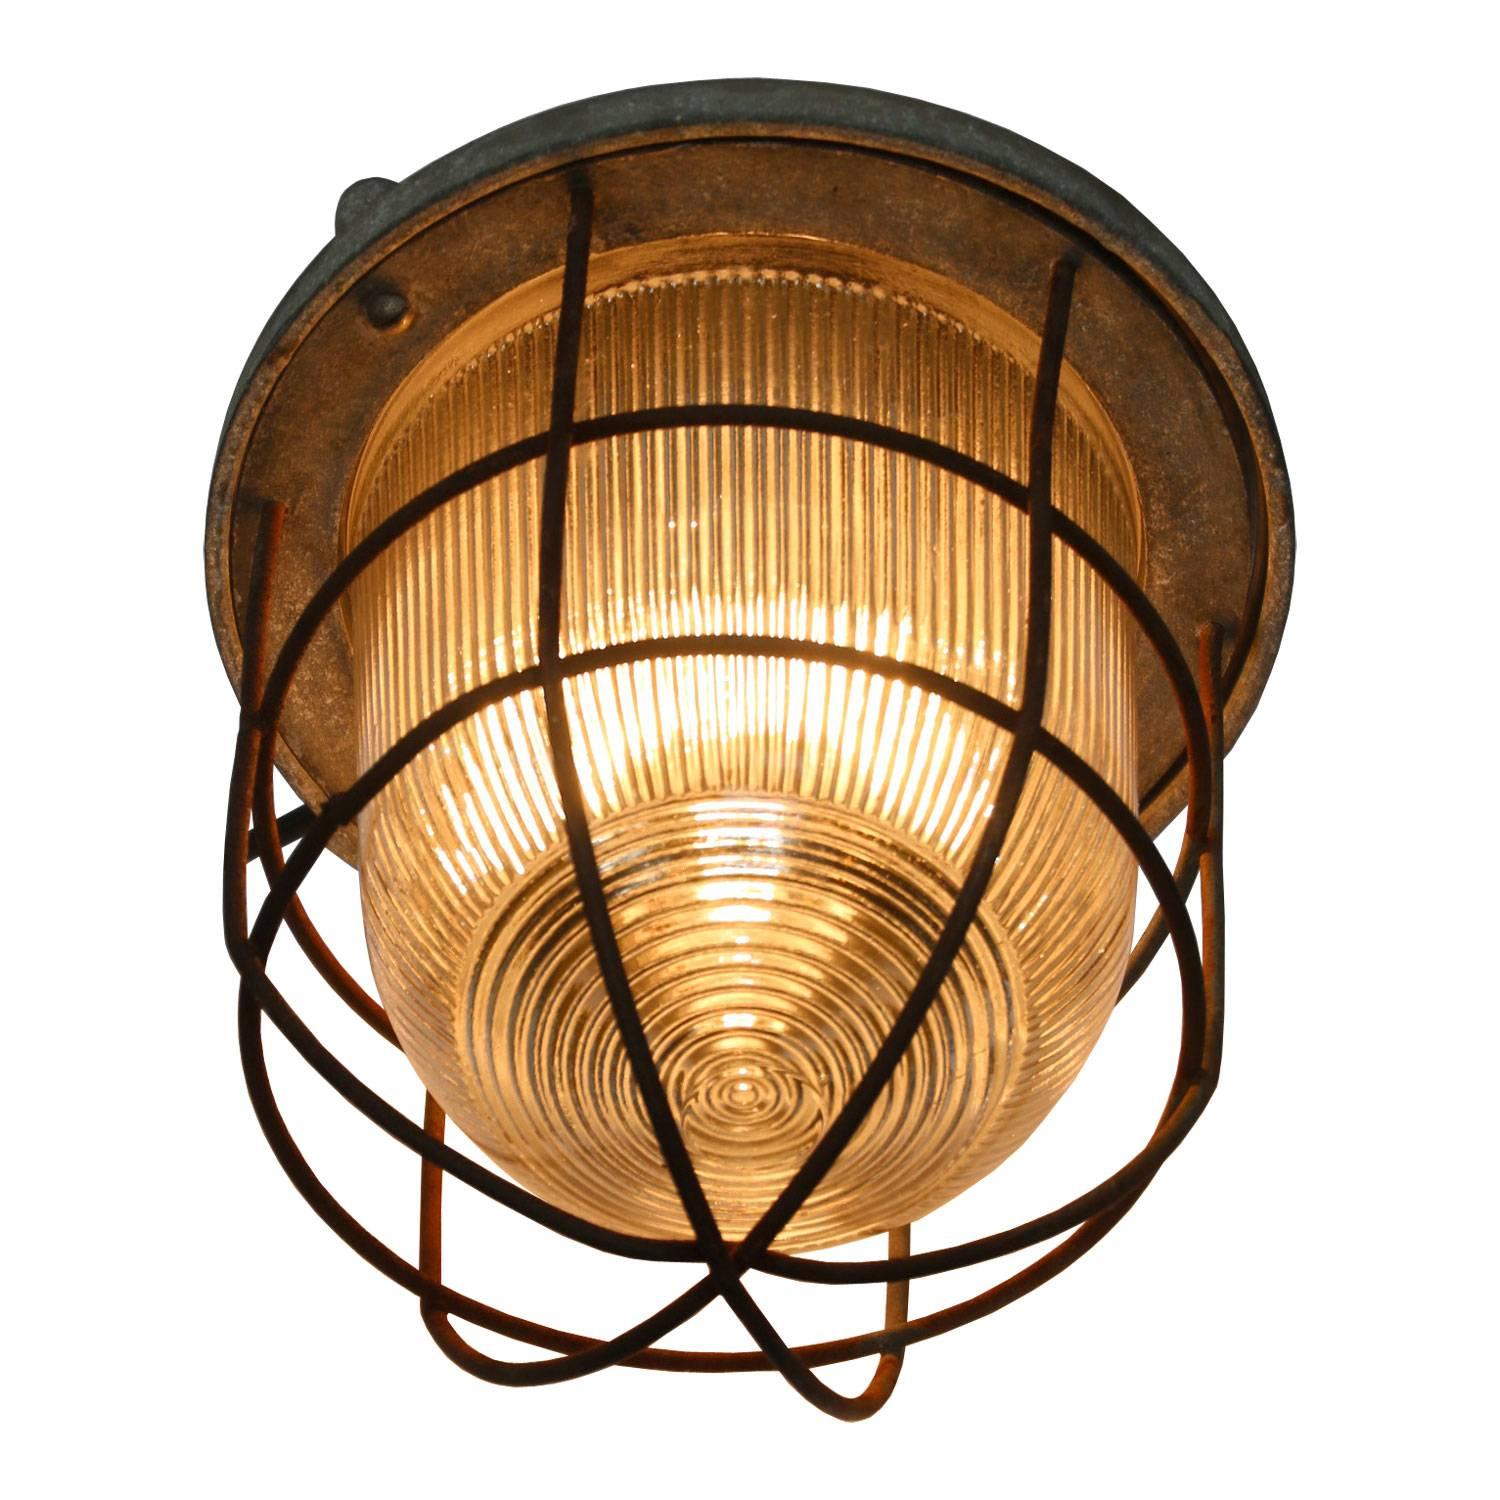 Hanging lamp with striped glass, green cast aluminum top.

Weight: 2.9 kg / 6.4 lb

All lamps have been made suitable by international standards for incandescent light bulbs, energy-efficient and LED bulbs. E26/E27 bulb holders and new wiring